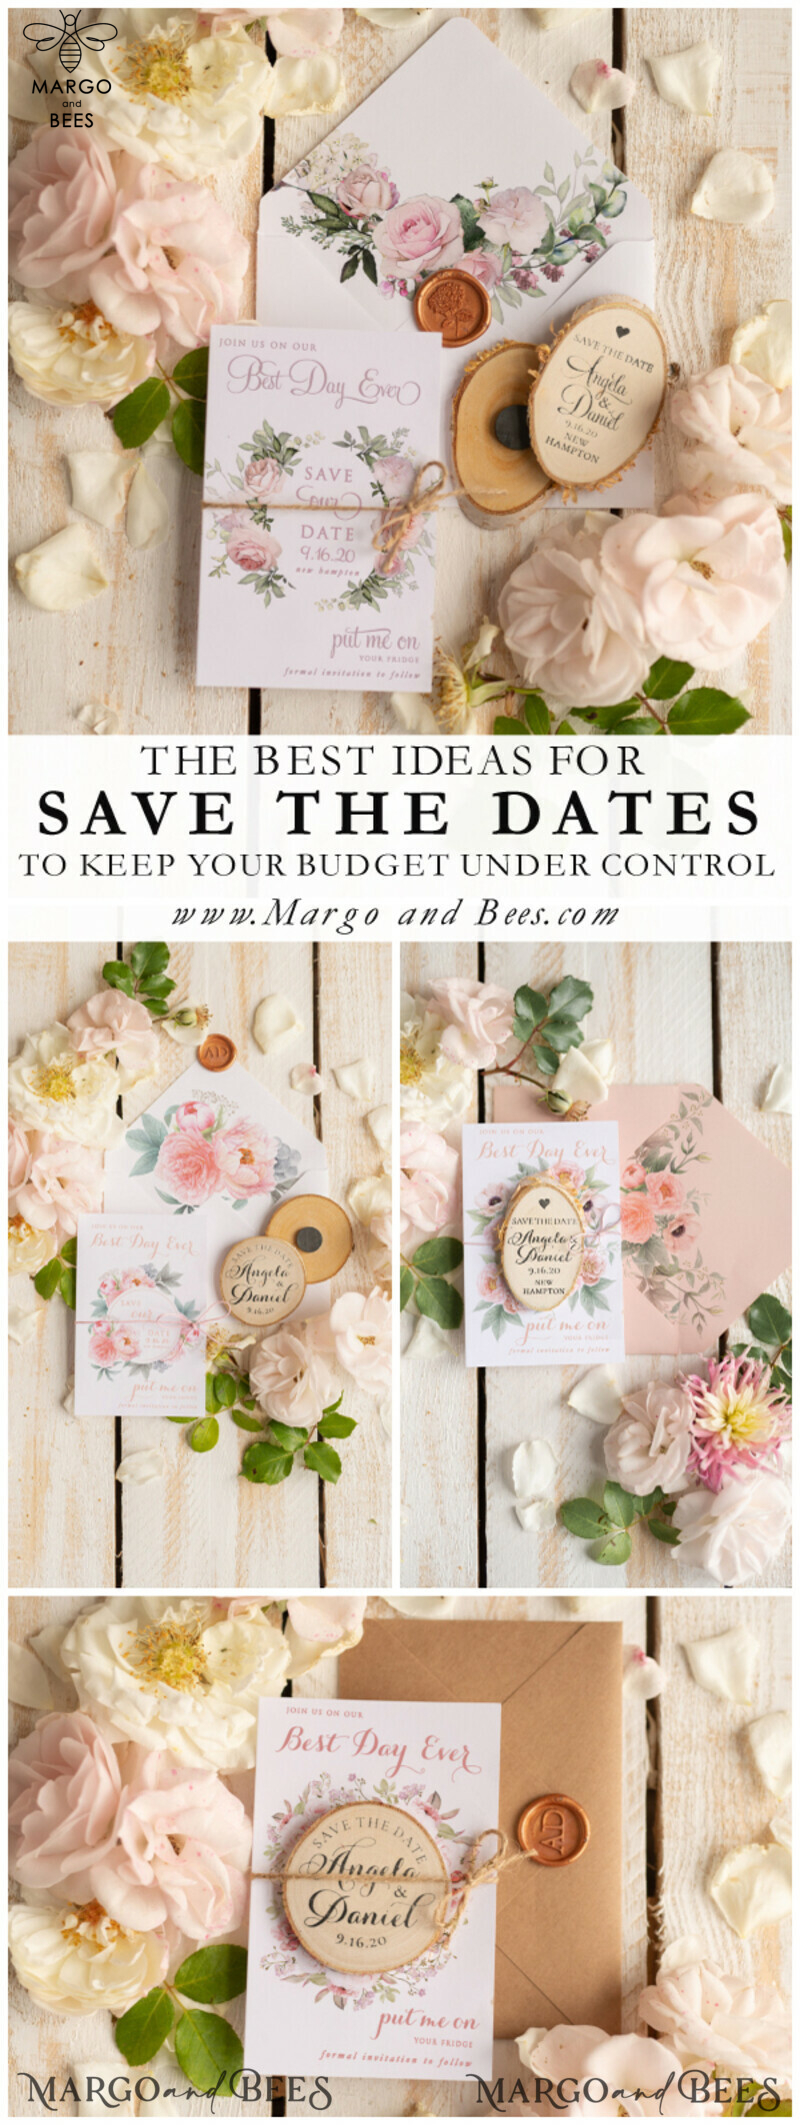 Beautiful Personalised Wedding Save the Date Card and Wood Slice Magnet: Boho Rustic Wooden Magnets for Your Save Our Dates-6